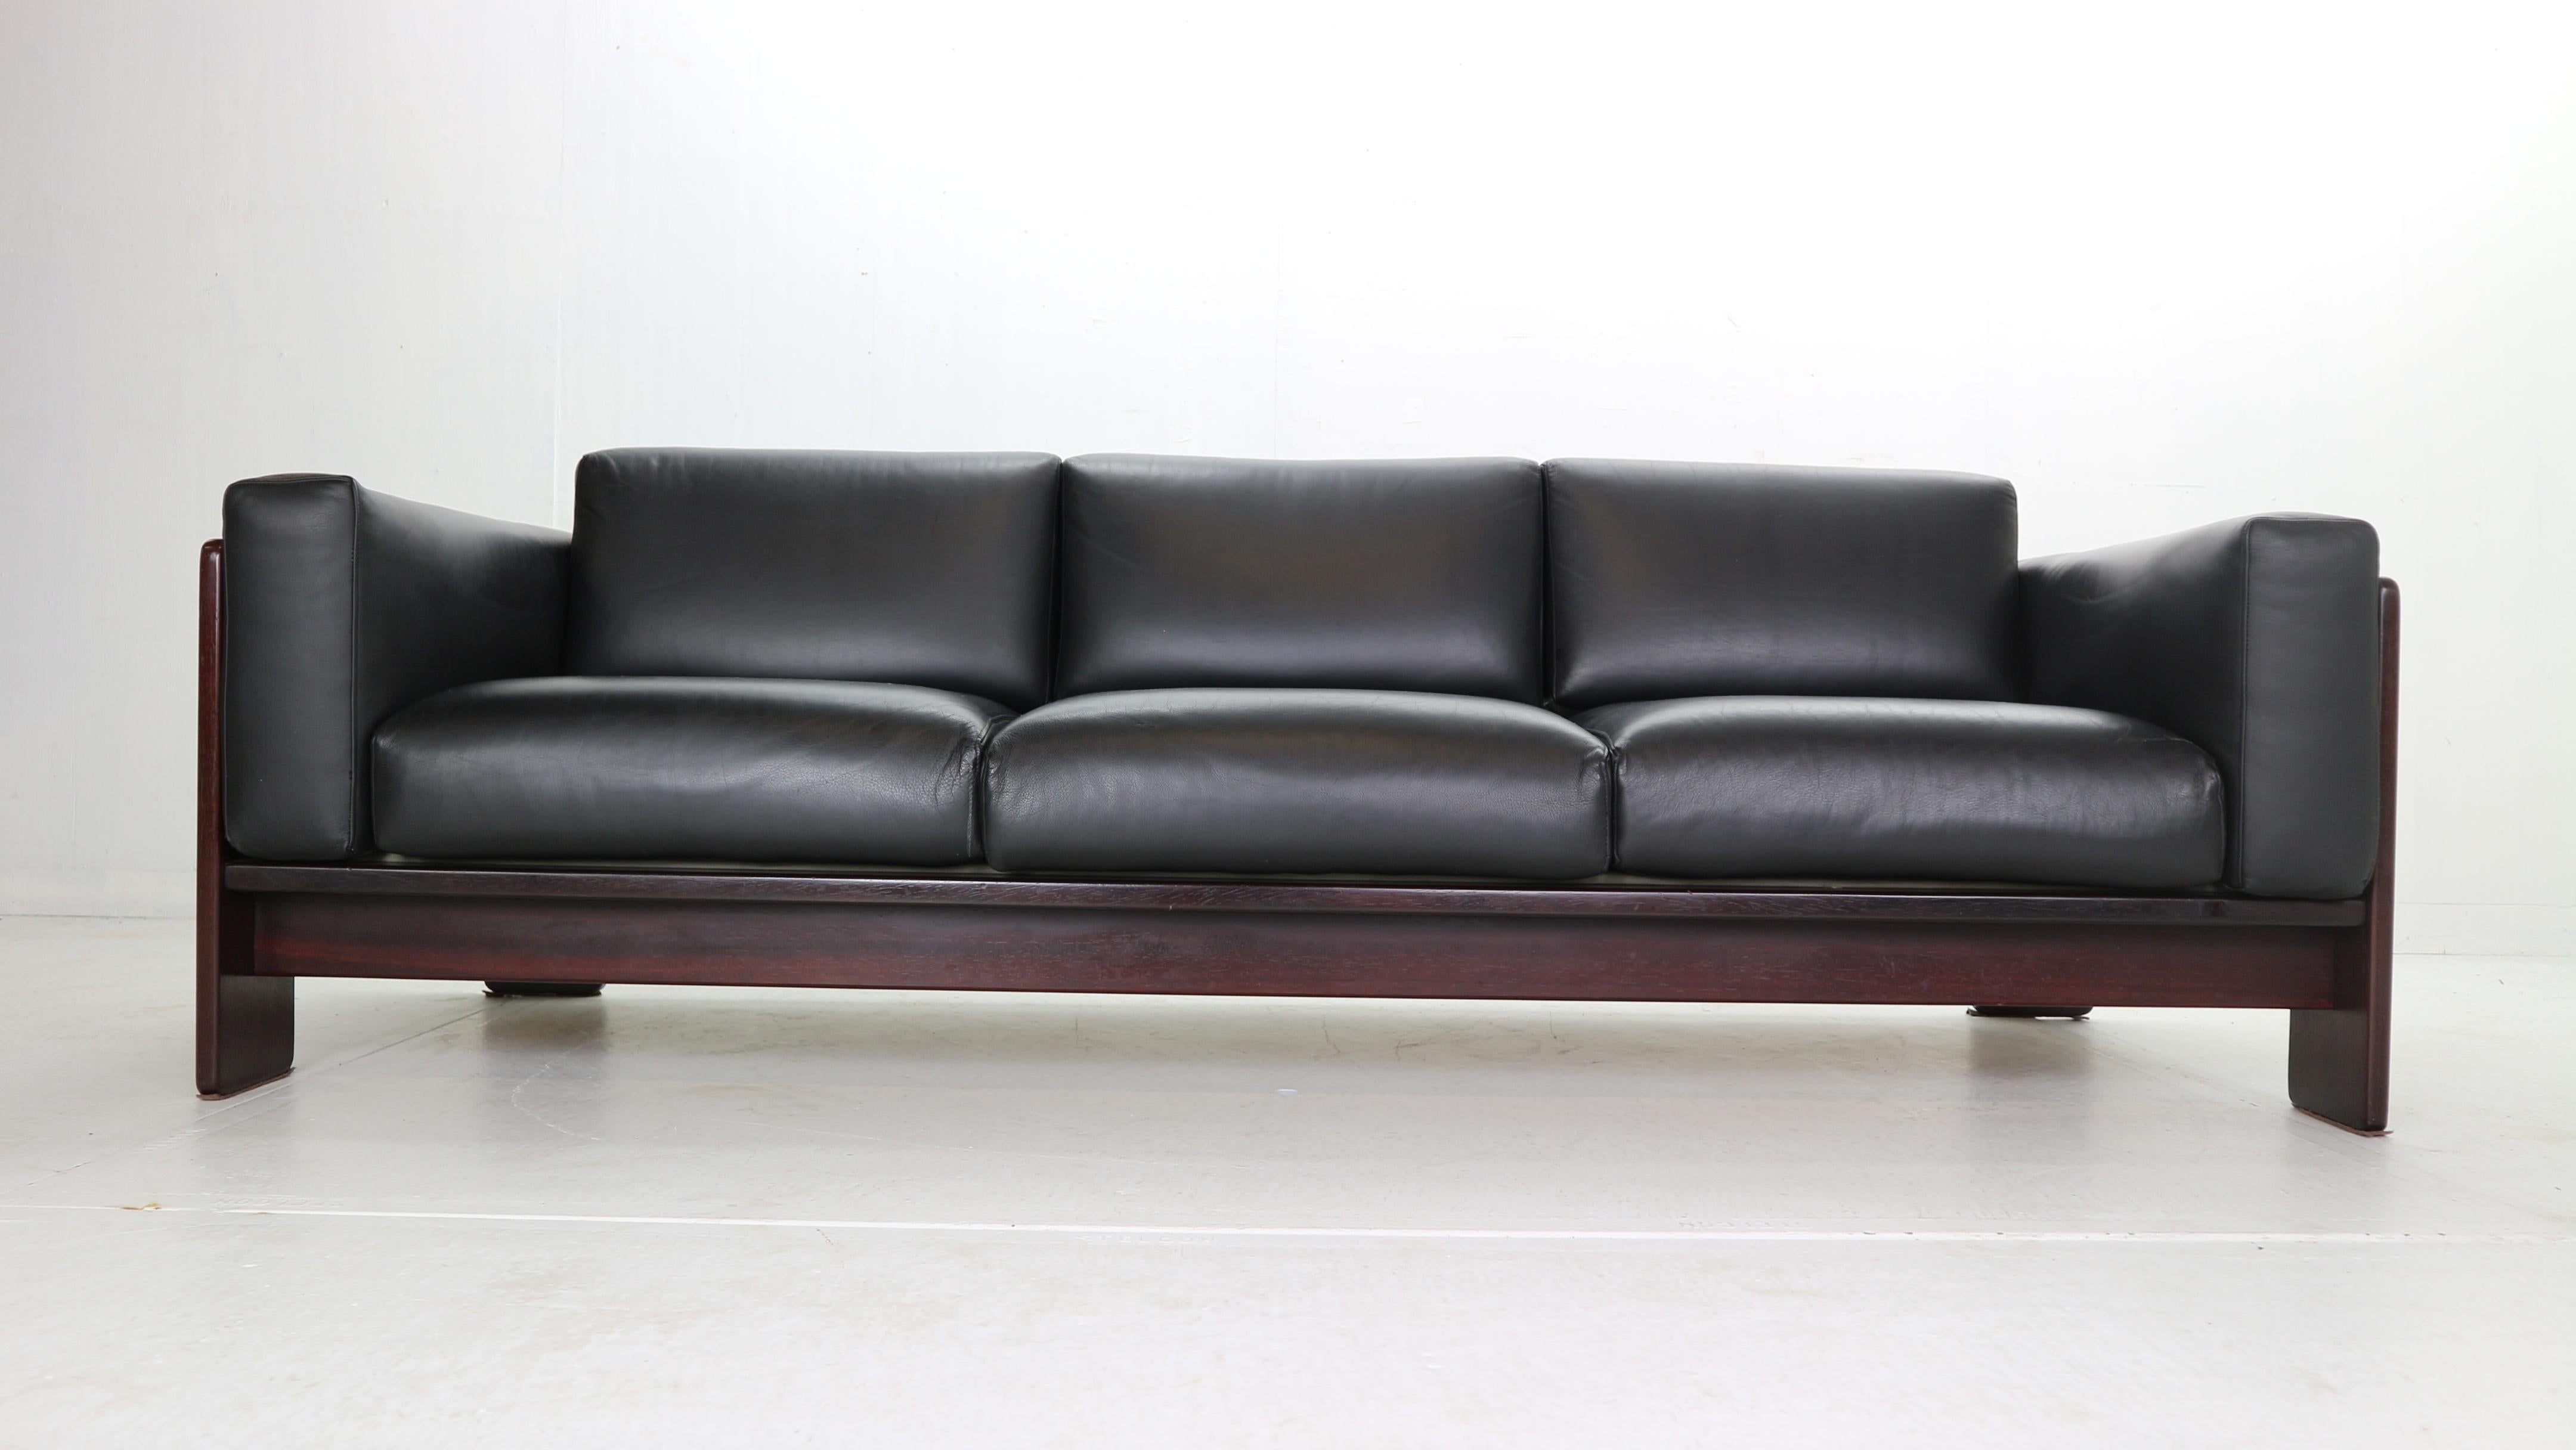 Three-seat sofa was produced by Knool in 1960s and designed by Tobia Scarpa.
Mid-Century Modern period Italian design item.
Tobia Scarpa designed the Bastiano series for the experimental design laboratory of Gavina in 1960. About the result Gavina